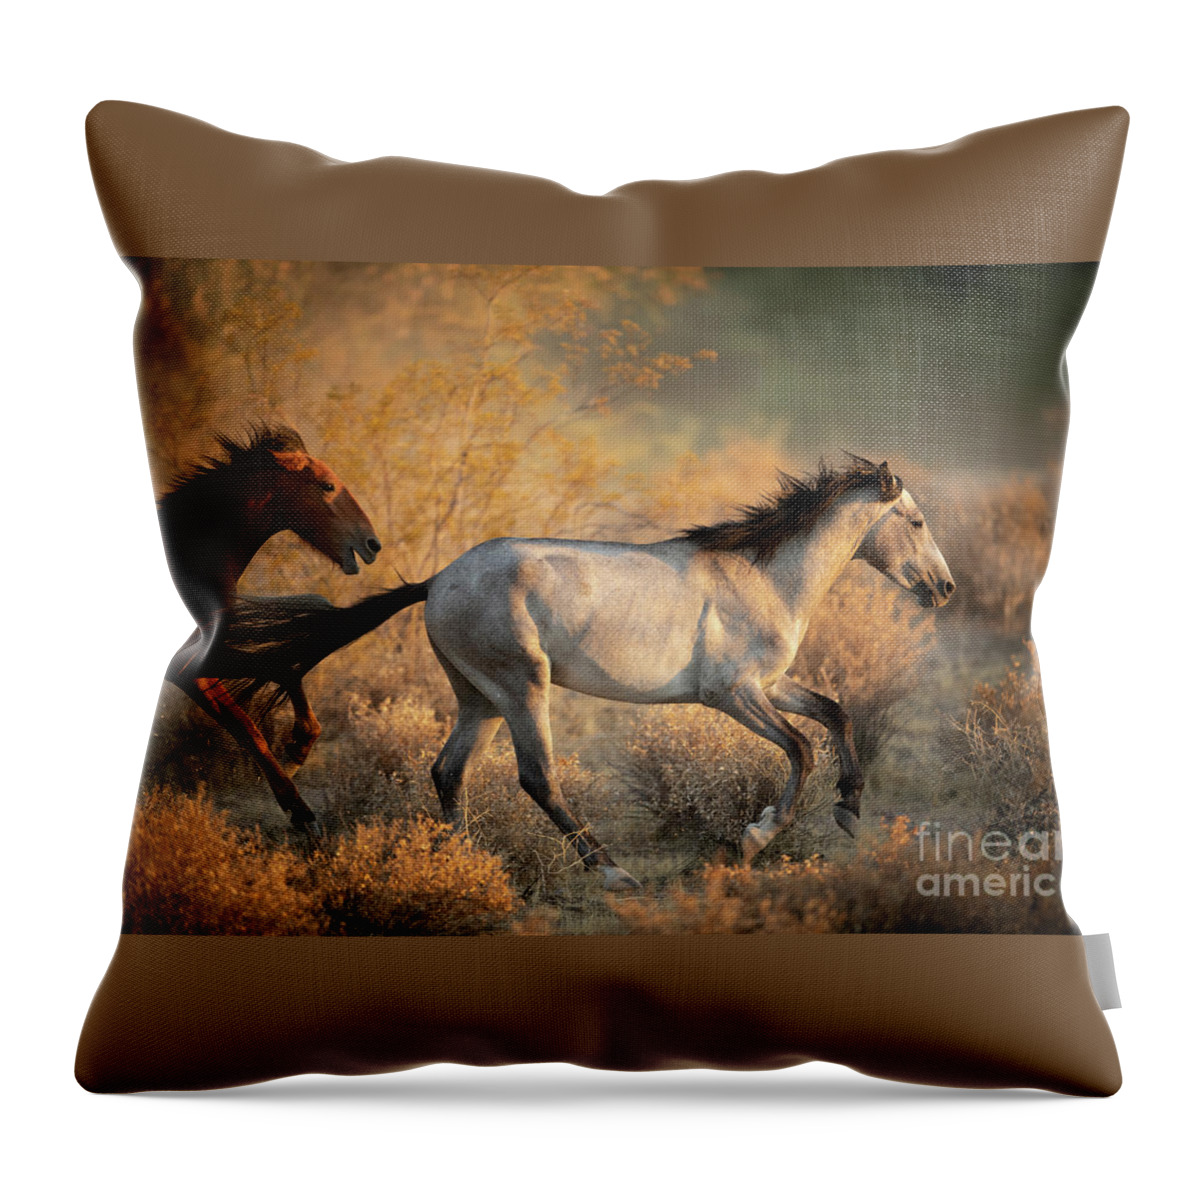 Salt River Wild Horses Throw Pillow featuring the photograph Running Free by Shannon Hastings